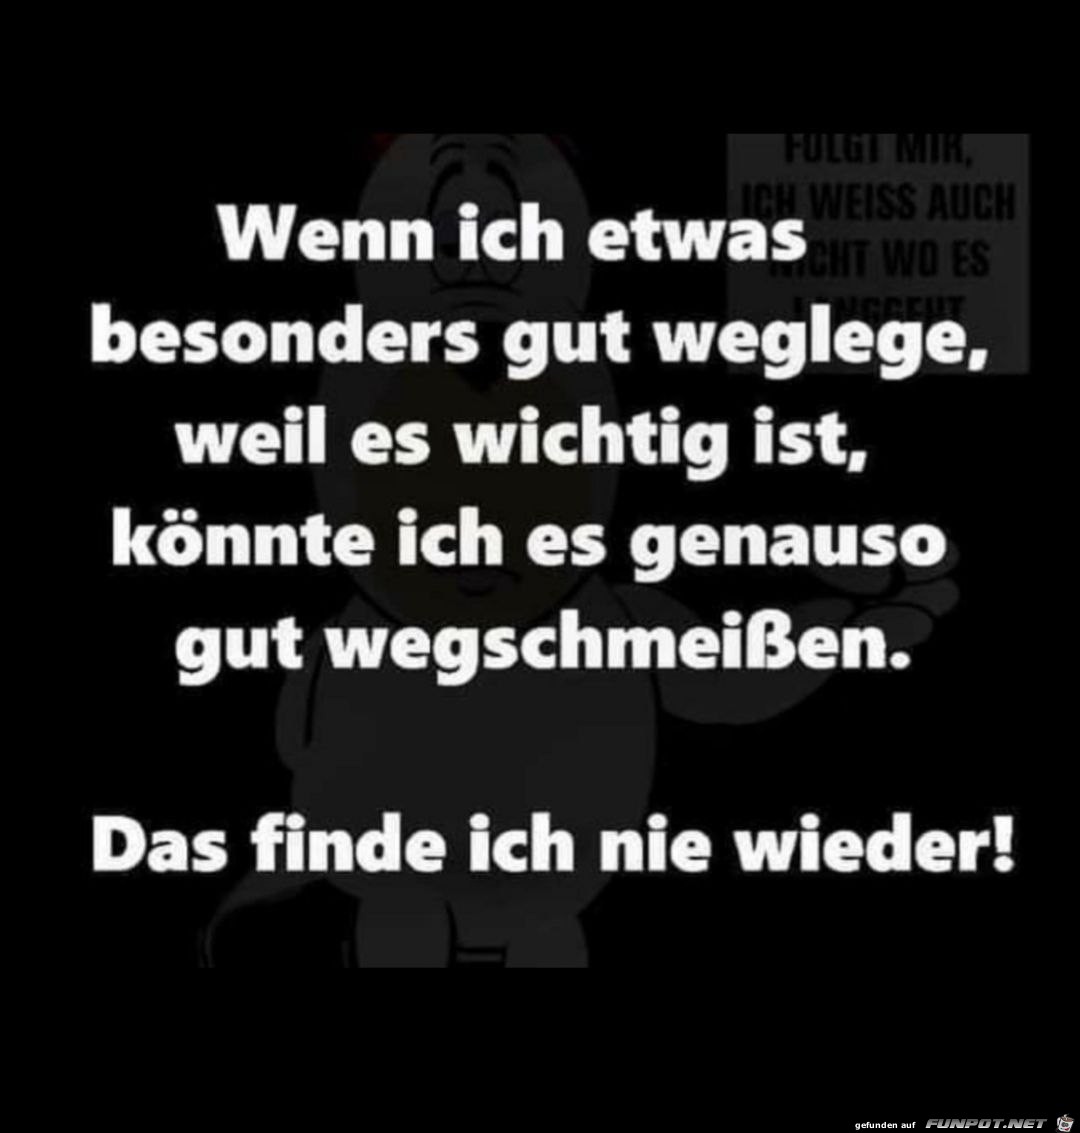 ist fast immer so